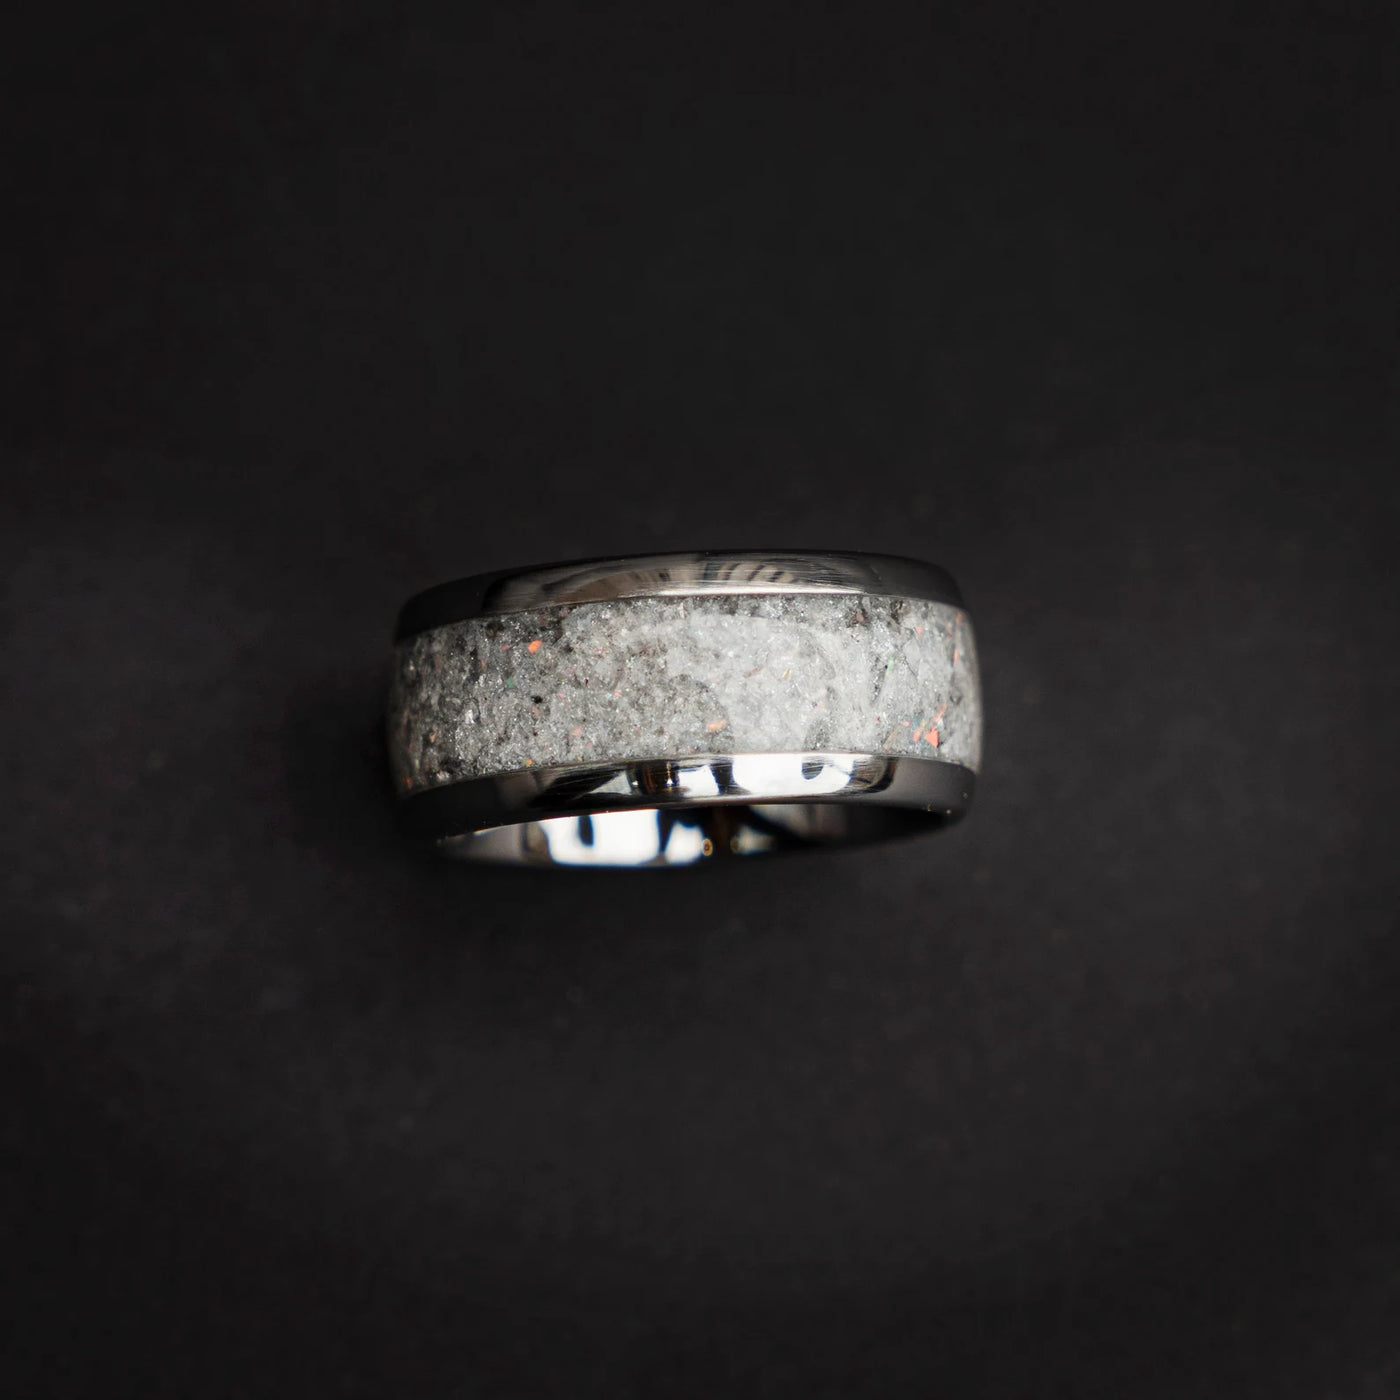 Moonstone Wide Tungsten Ring With Opal - Decazi